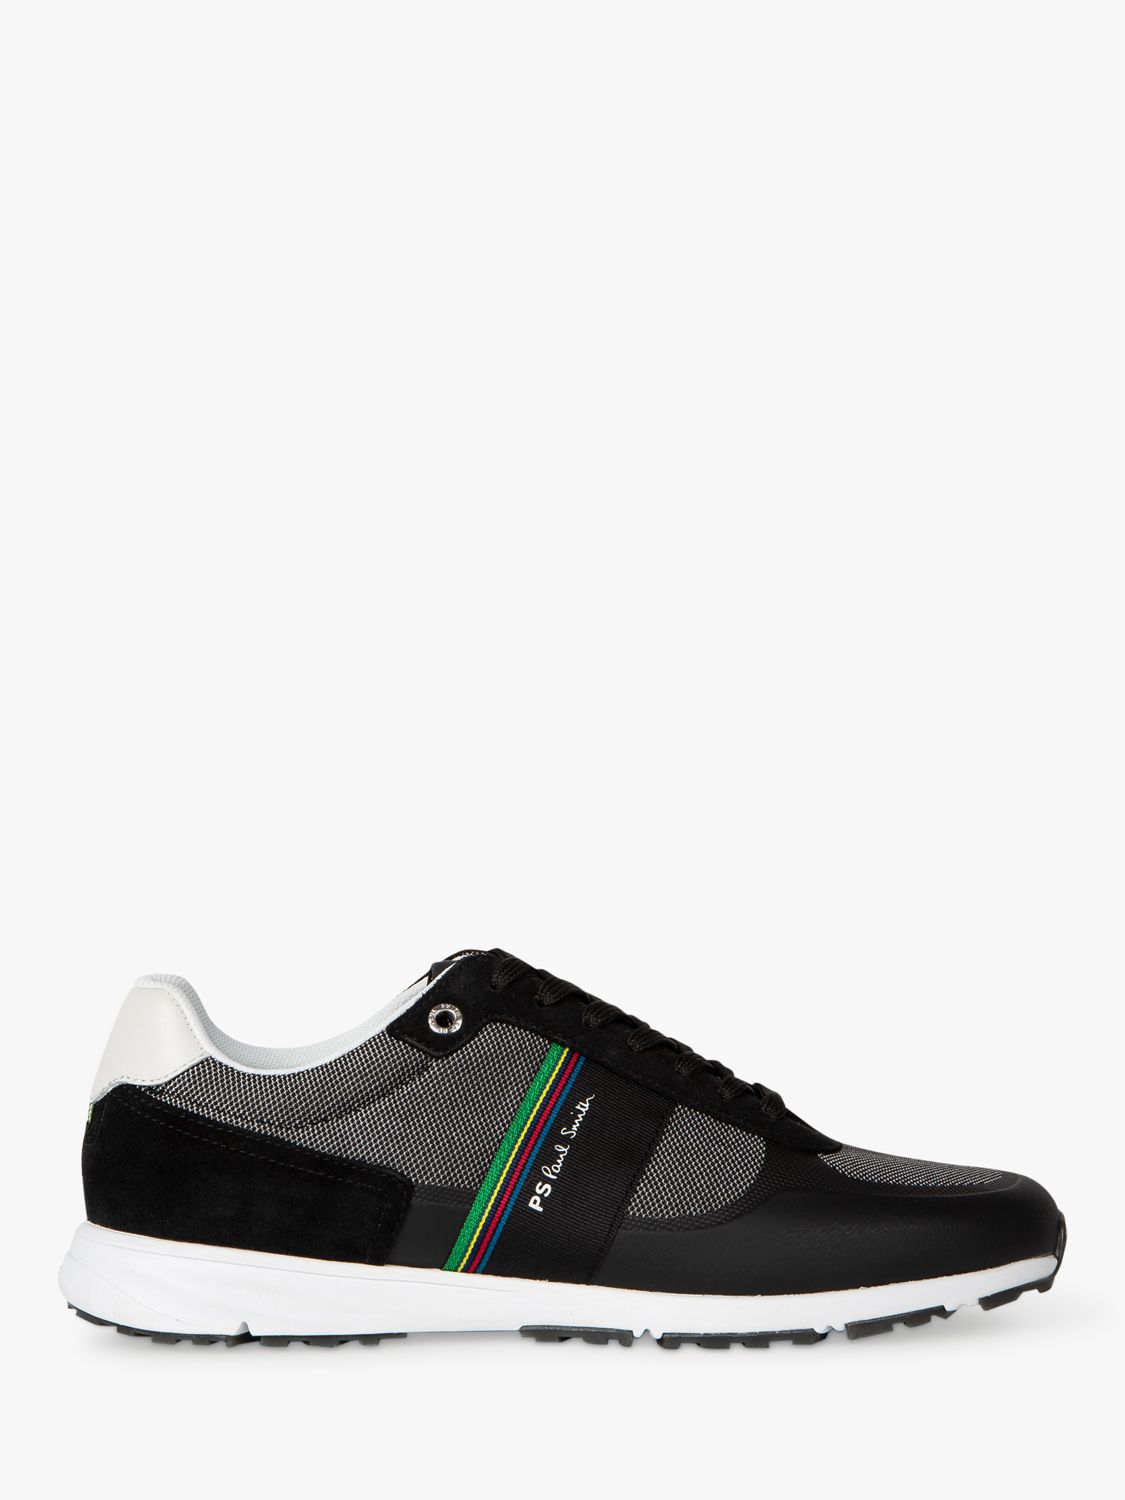 Paul Smith Huey Suede Trainers, Black at John Lewis & Partners